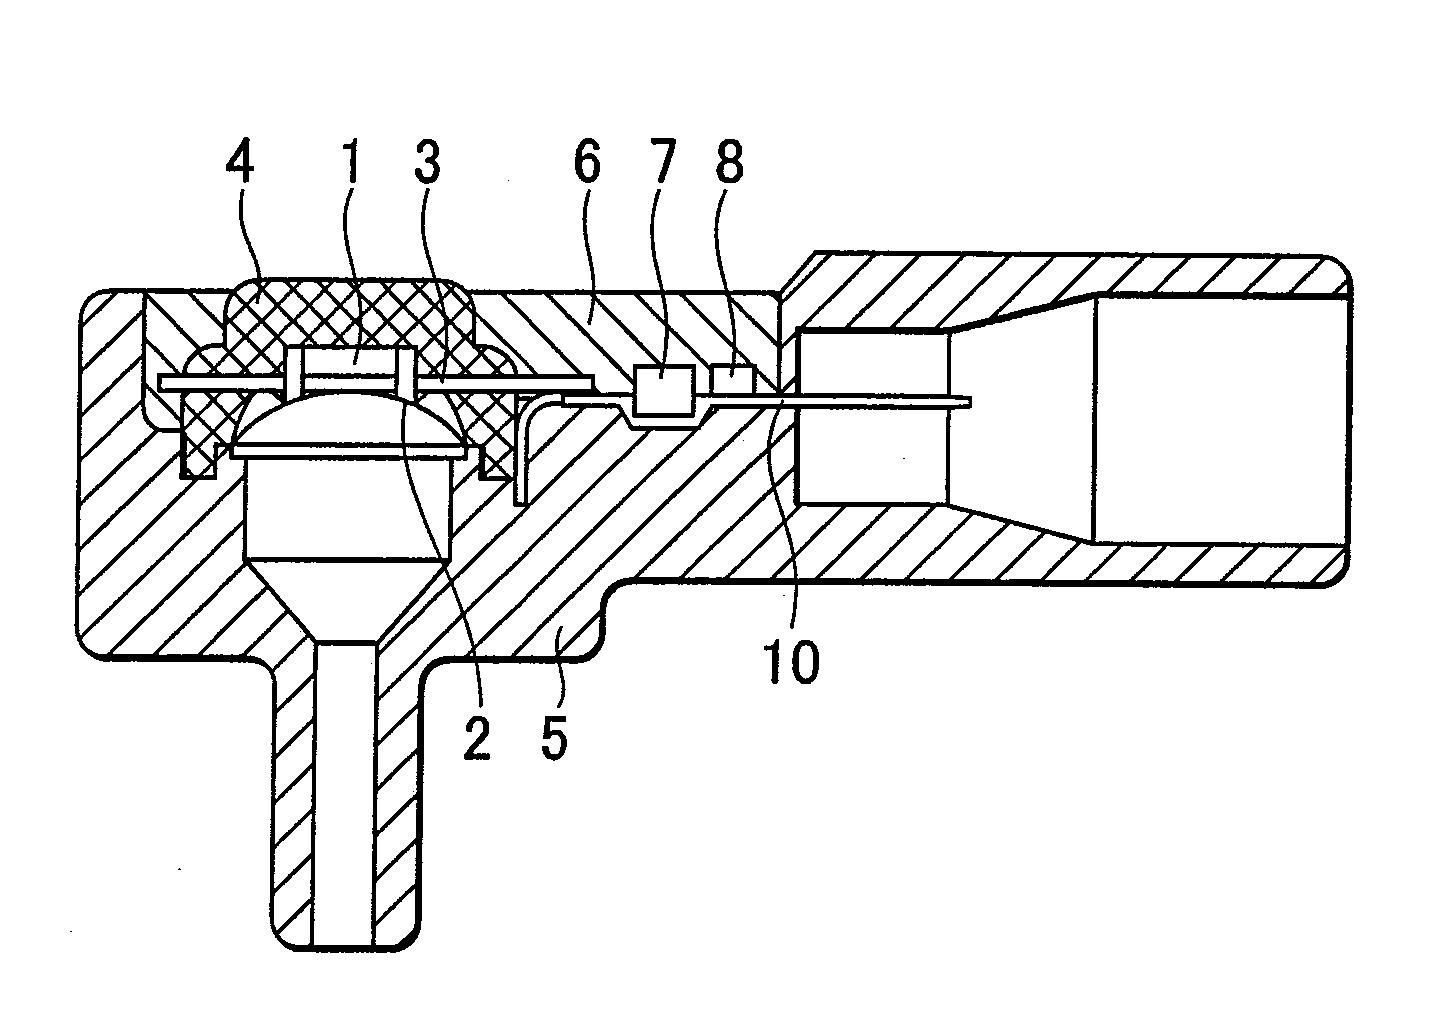 Electronic Device and Pressure Sensor